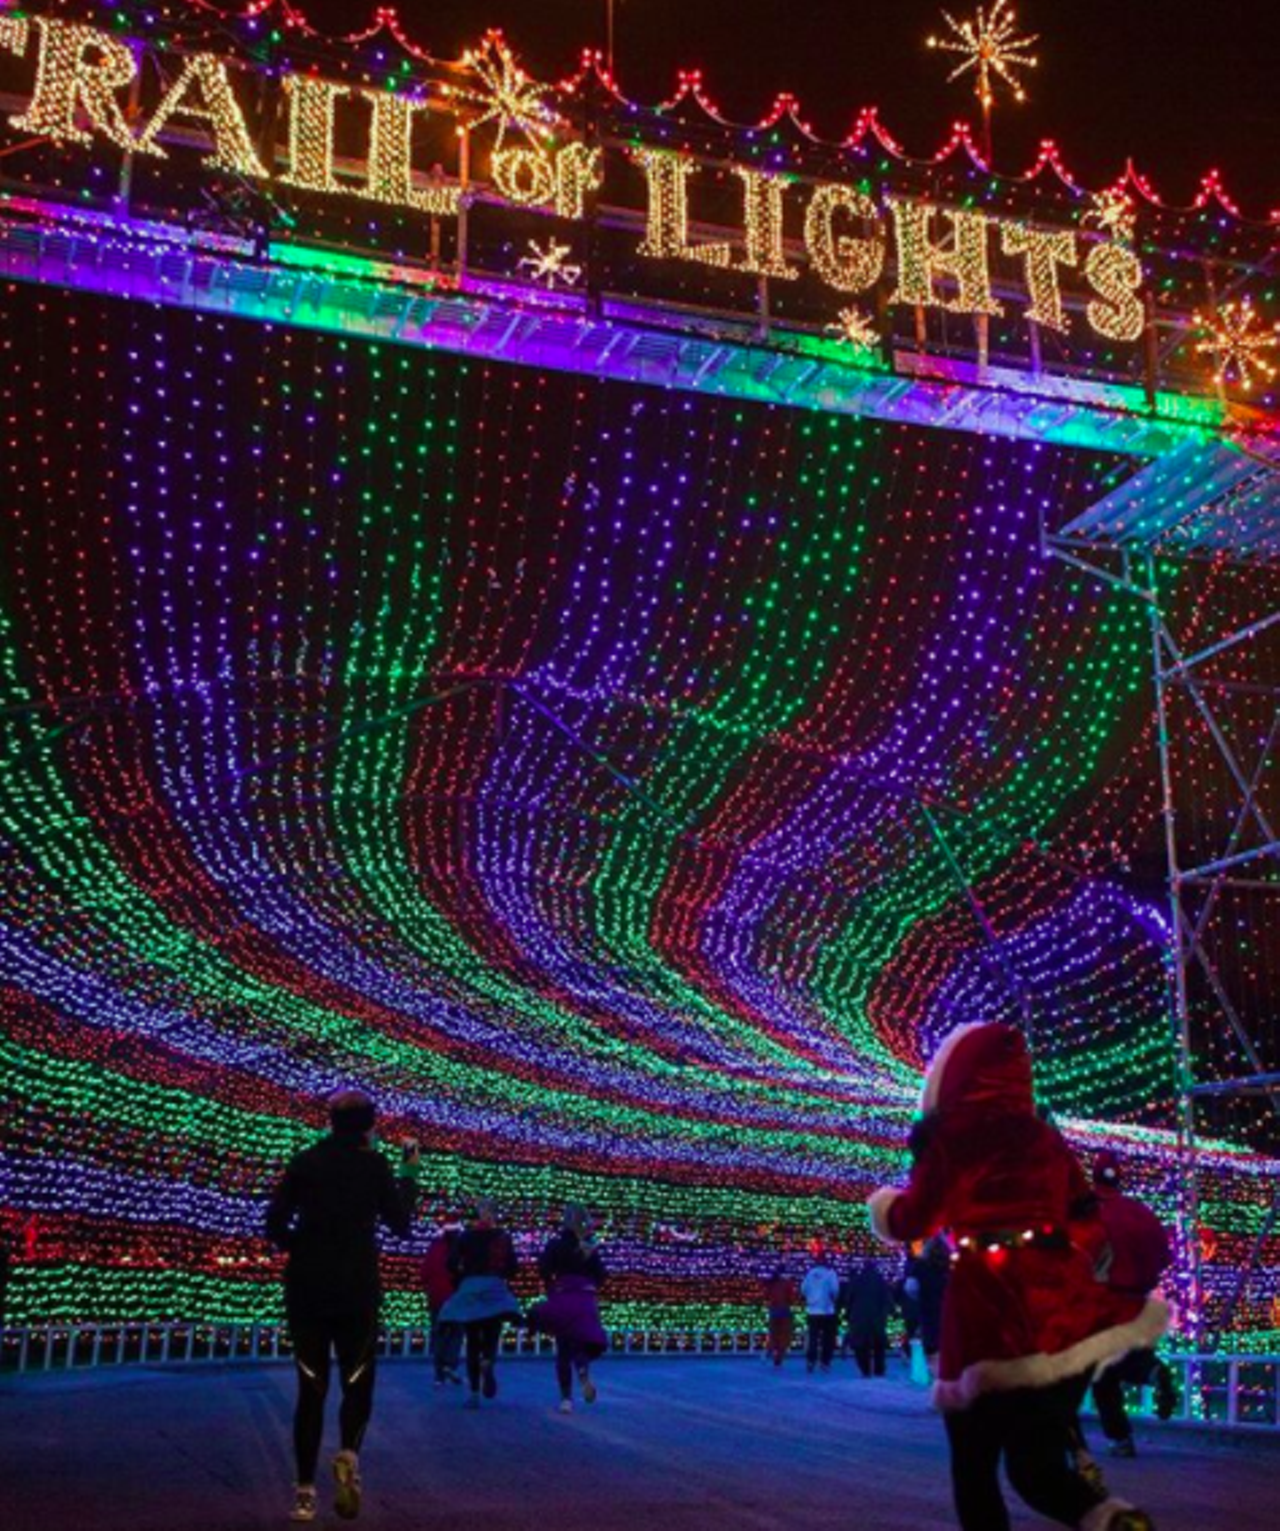 Austin’s Trail of Lights
Free or $3+, 2400 Barton Springs Road, austintrailoflights.org
For starters, it’s held in the same area as ACL, so you know it’s lit (excuse the pun). Location aside, this Austin staple is worth the road trip up I-35. And in addition to lights, Trail of Lights includes music, fun games and food trucks to be enjoyed. Be sure to plan accordingly since some nights have free admission, just be ready to brave the crowds. Running December 9-23, 7-10pm.
Photo via atxlights / Instagram